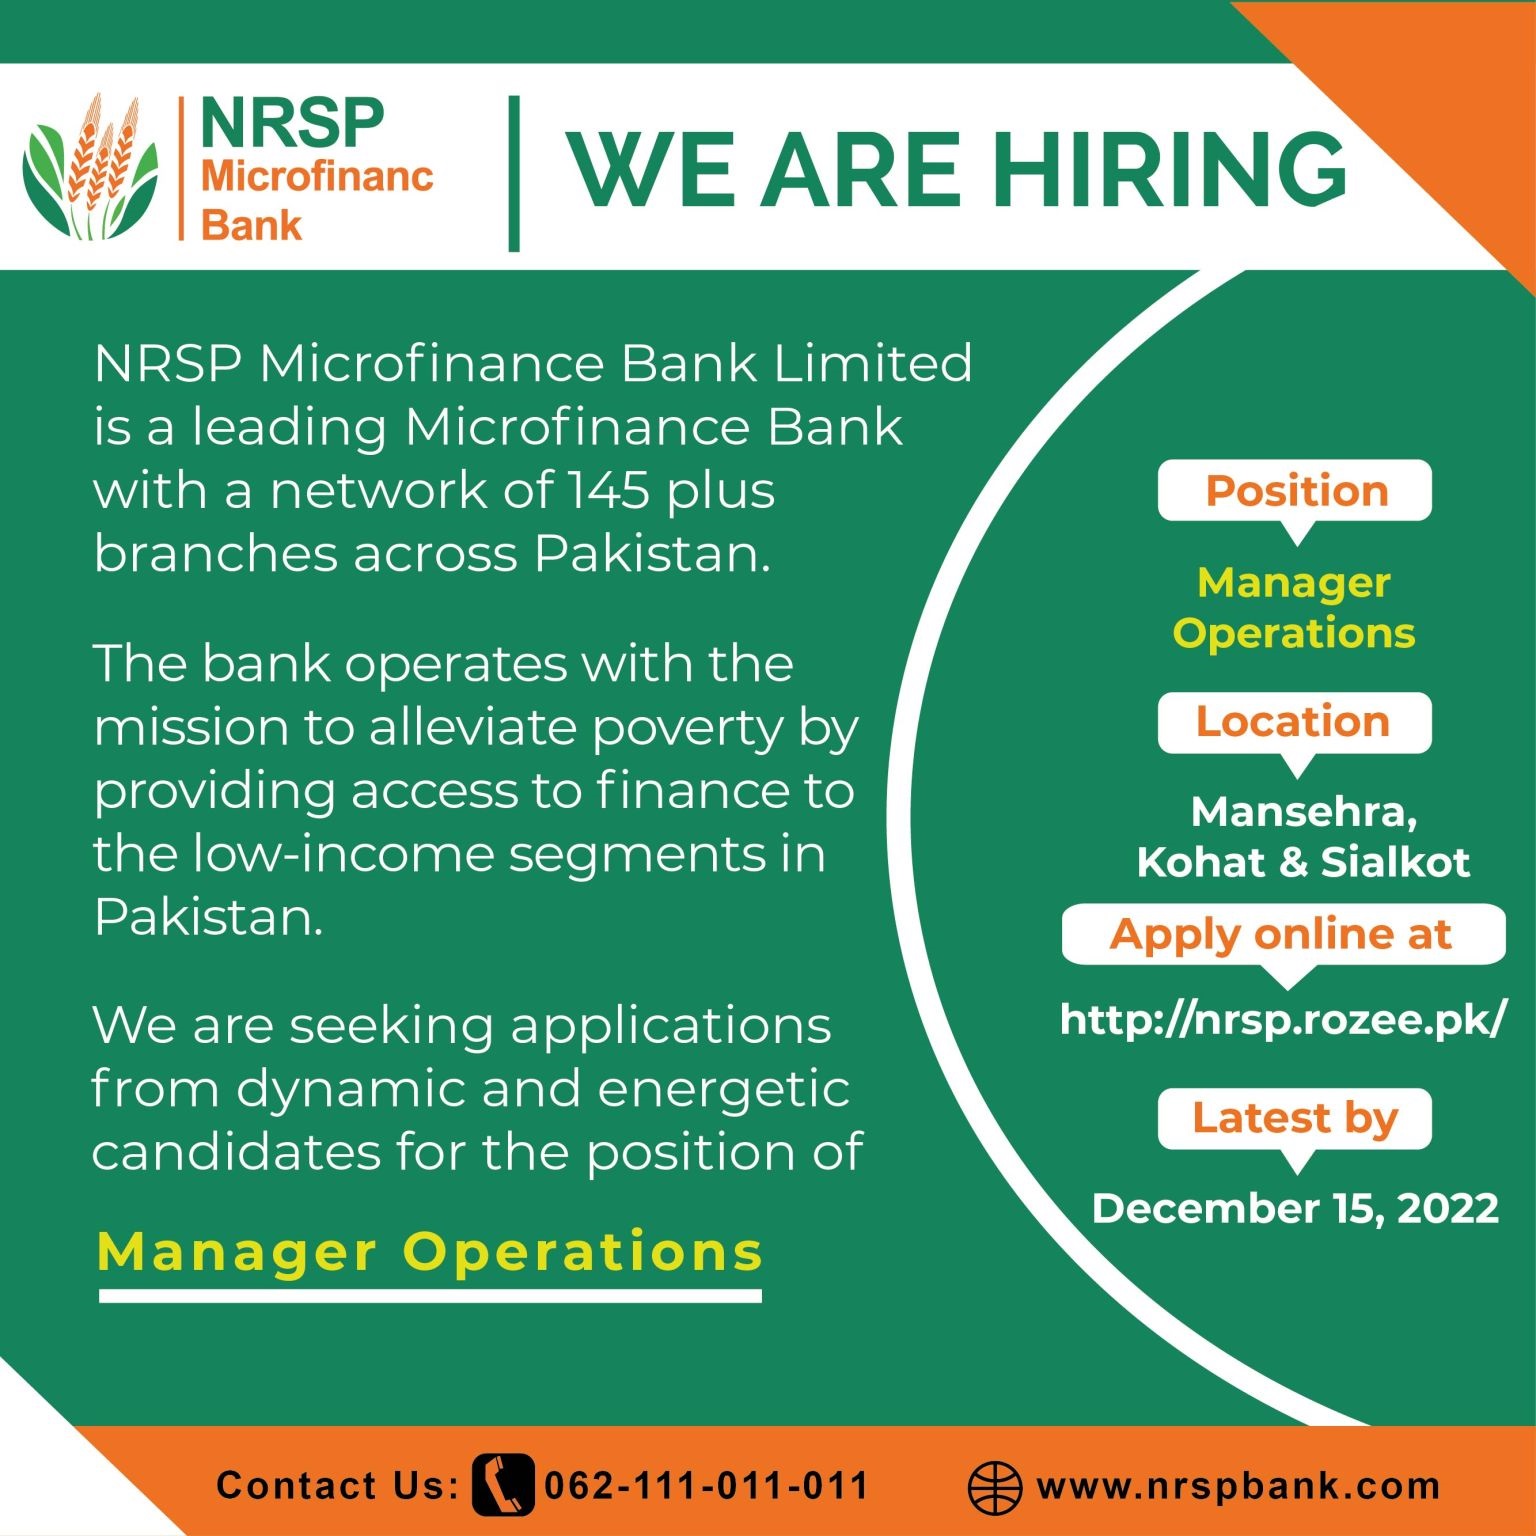 NRSP Microfinance Bank Ltd Jobs For Operations Manager